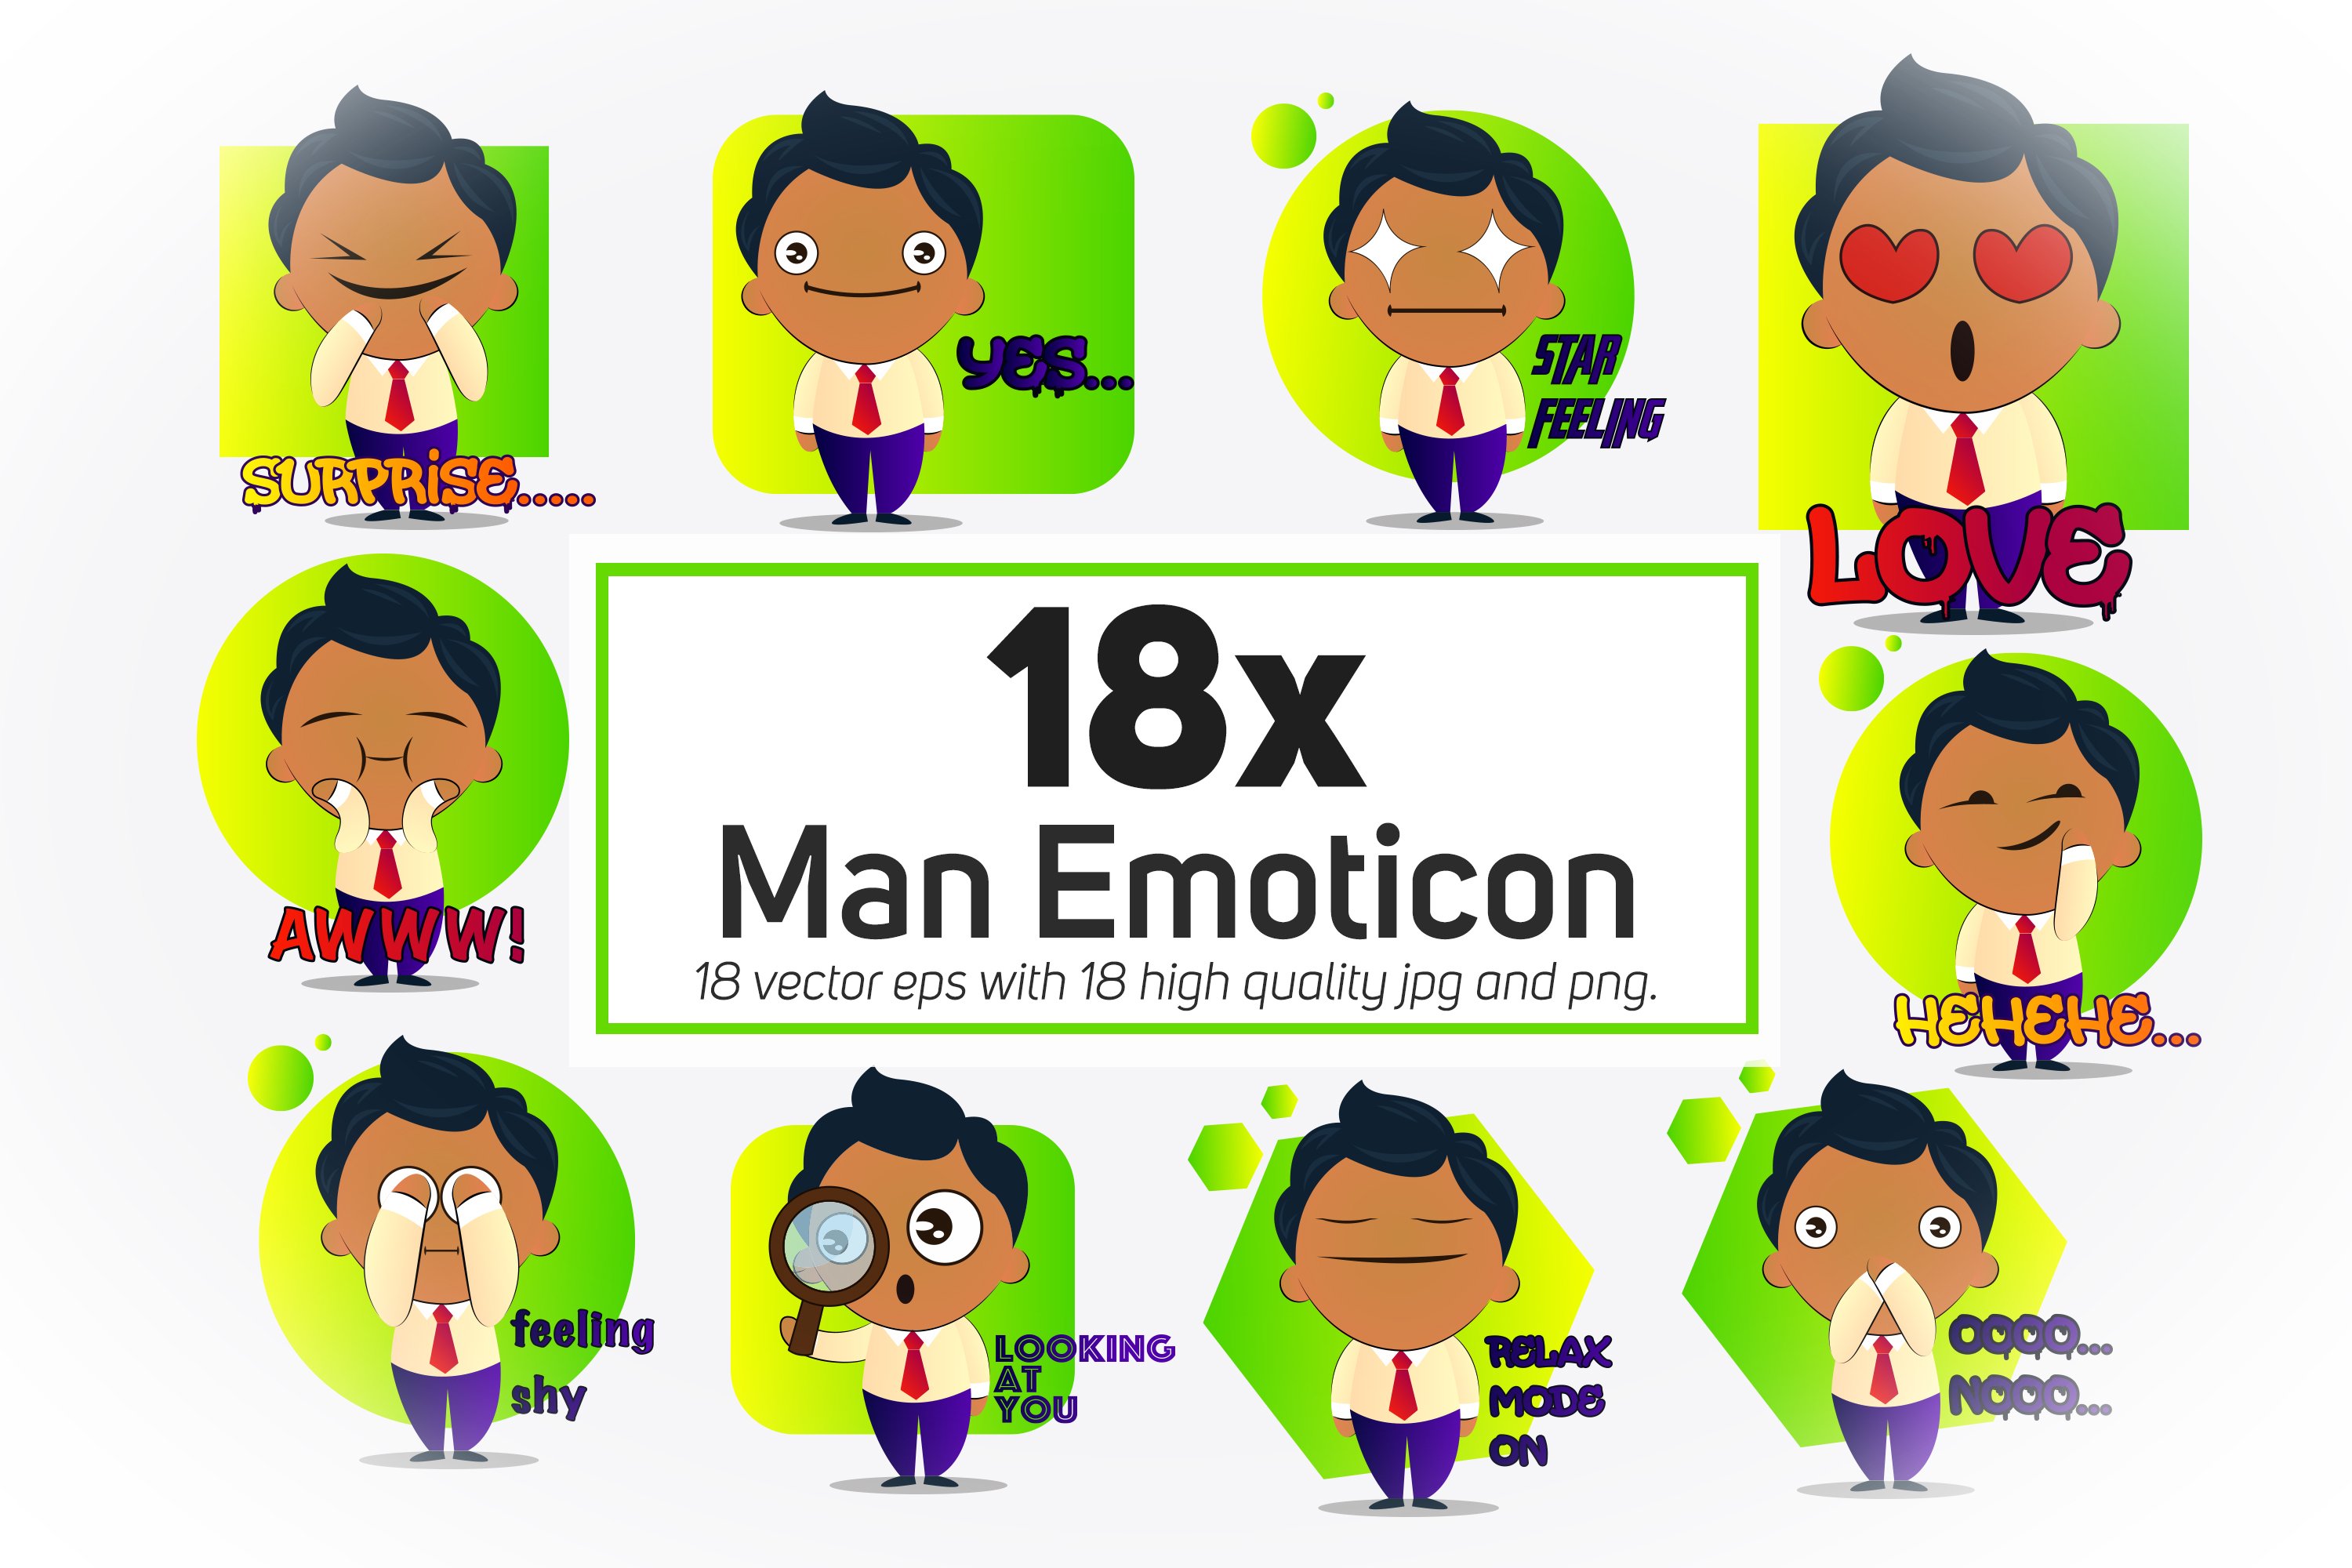 Cover with cartoon images of a man on a green background emoticons.